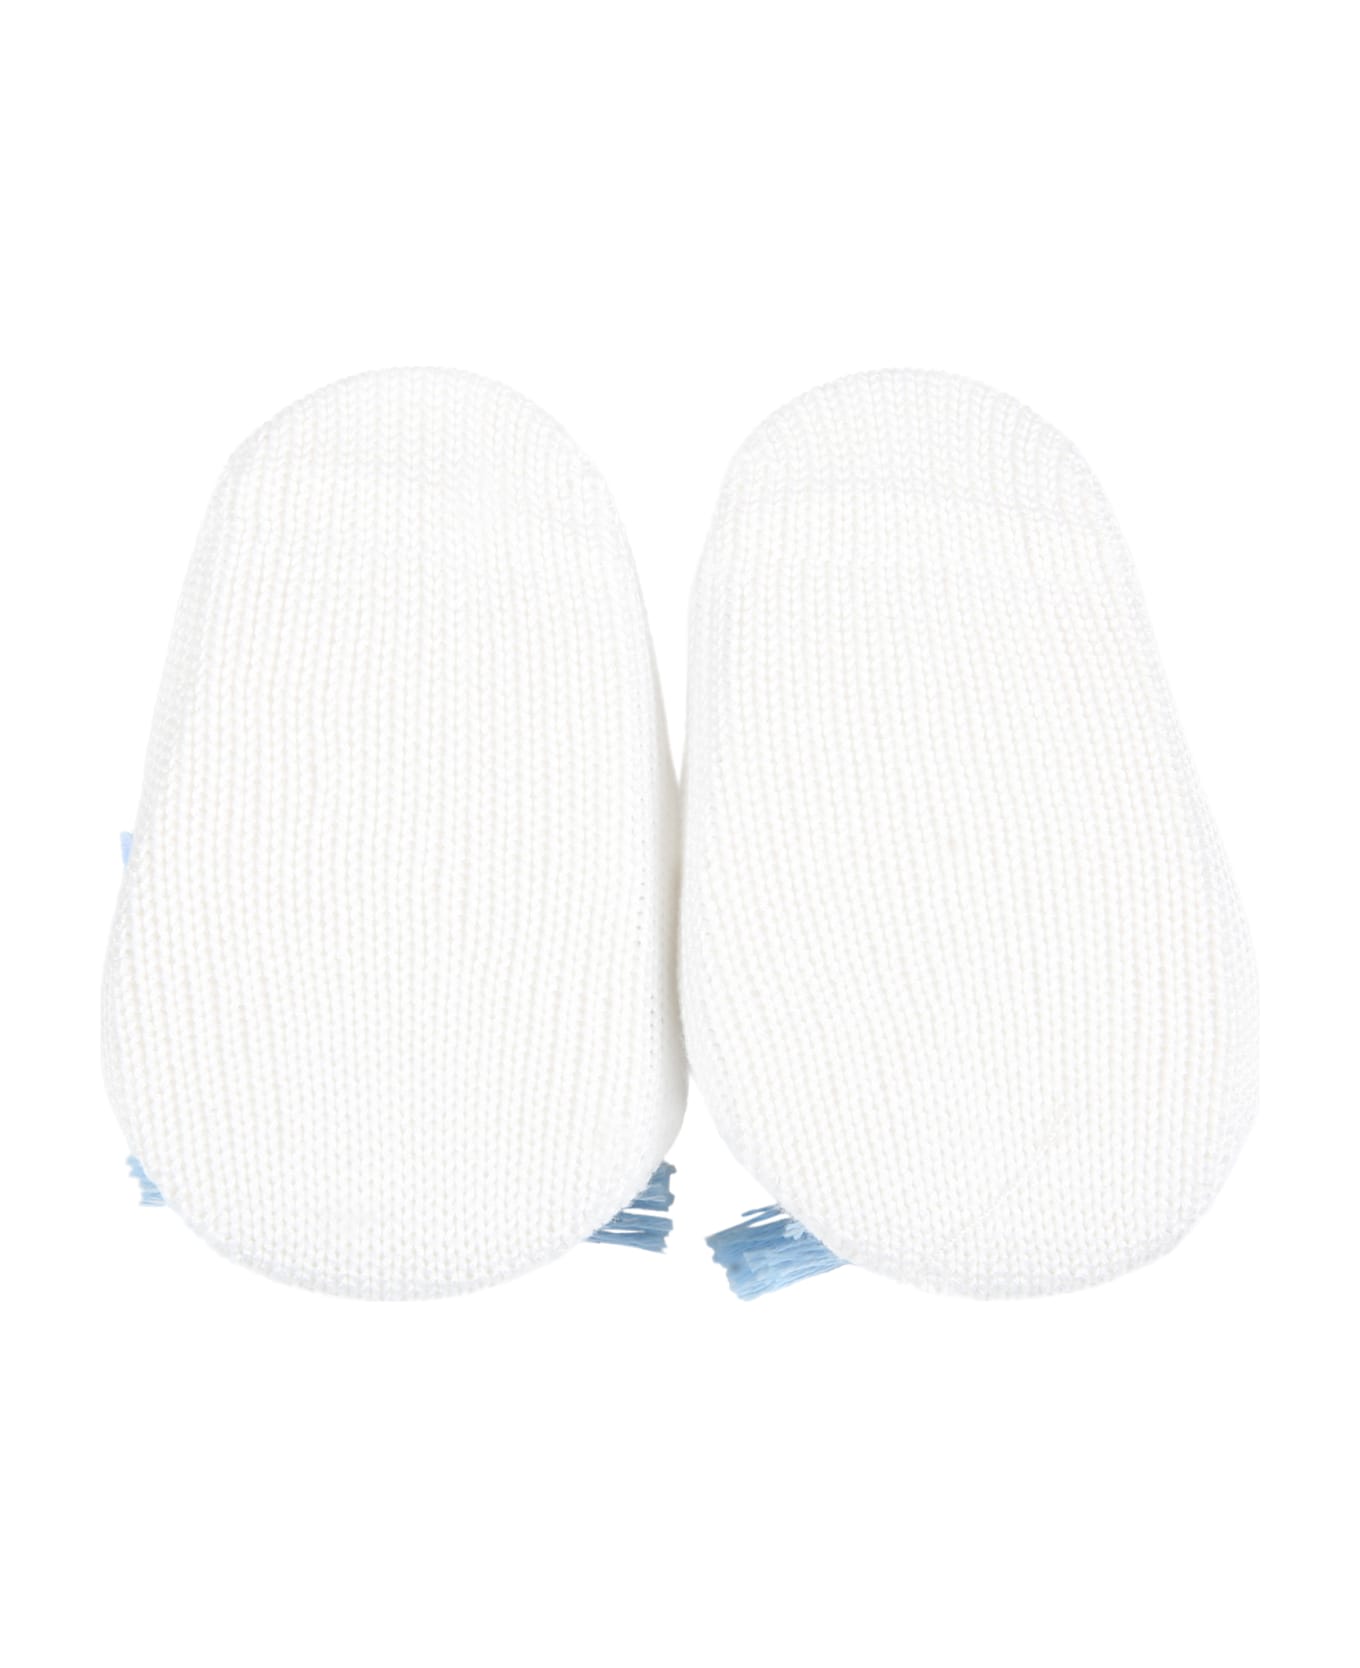 Story Loris White Baby-bootee For Baby Boy - White アクセサリー＆ギフト